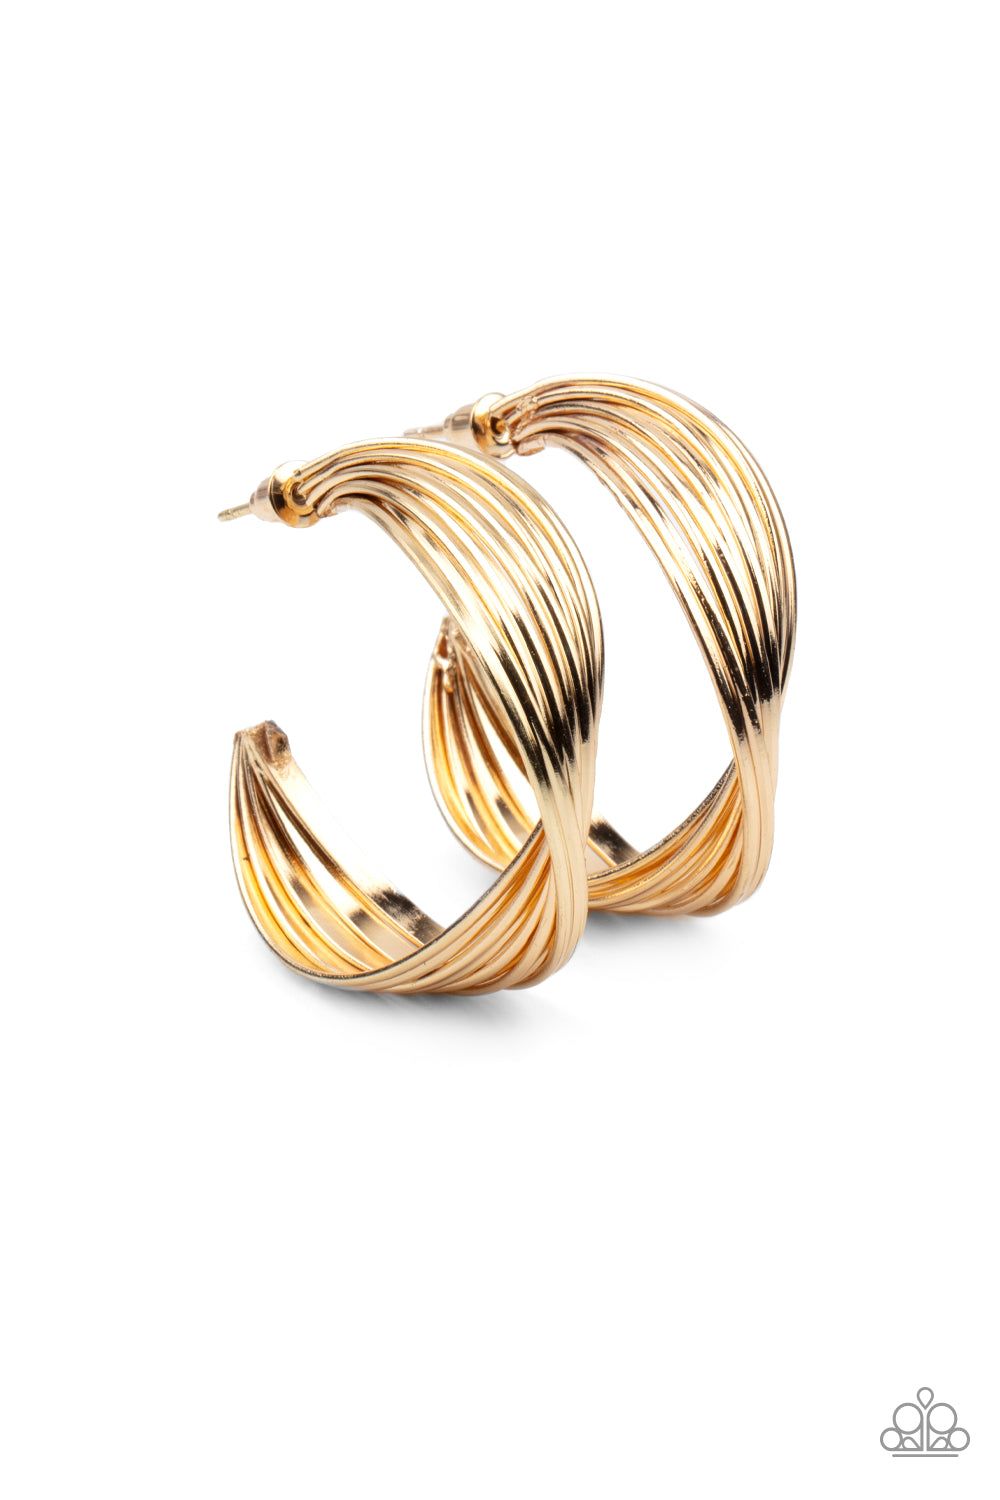 Curves In All The Right Places - Gold Earrings